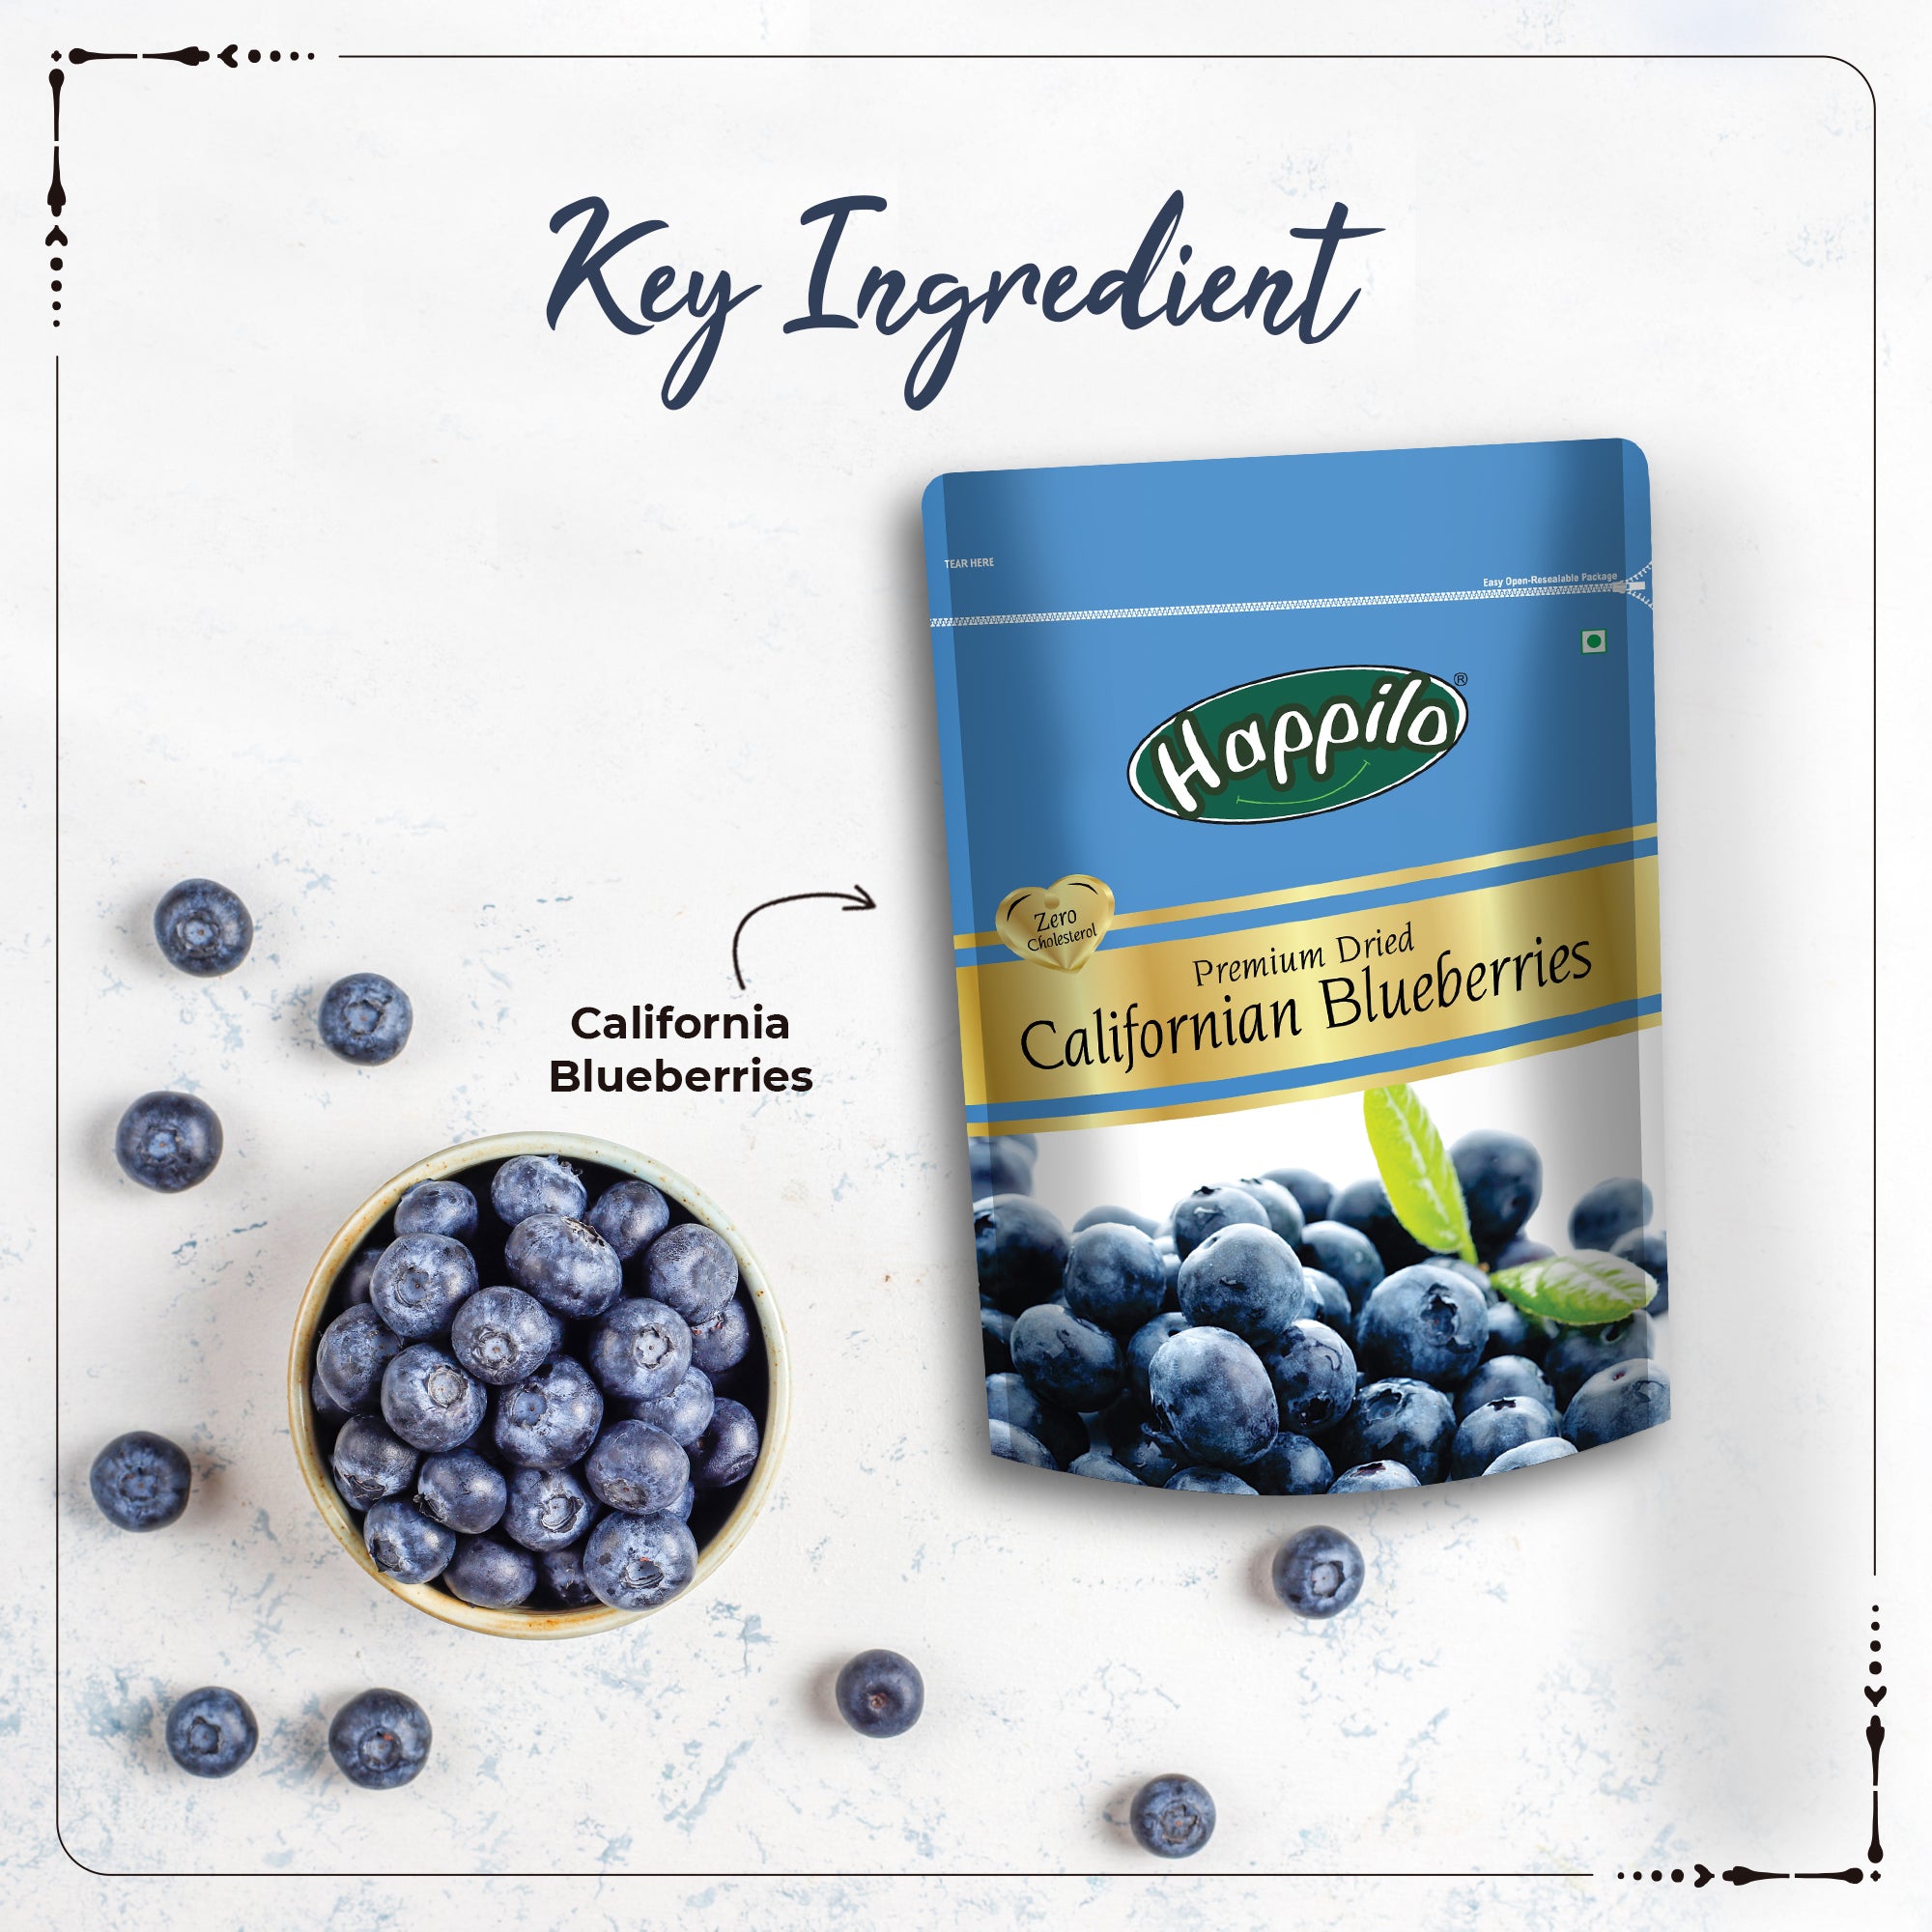 Happilo Healthy & Sweet Calfornian Dried Blueberries